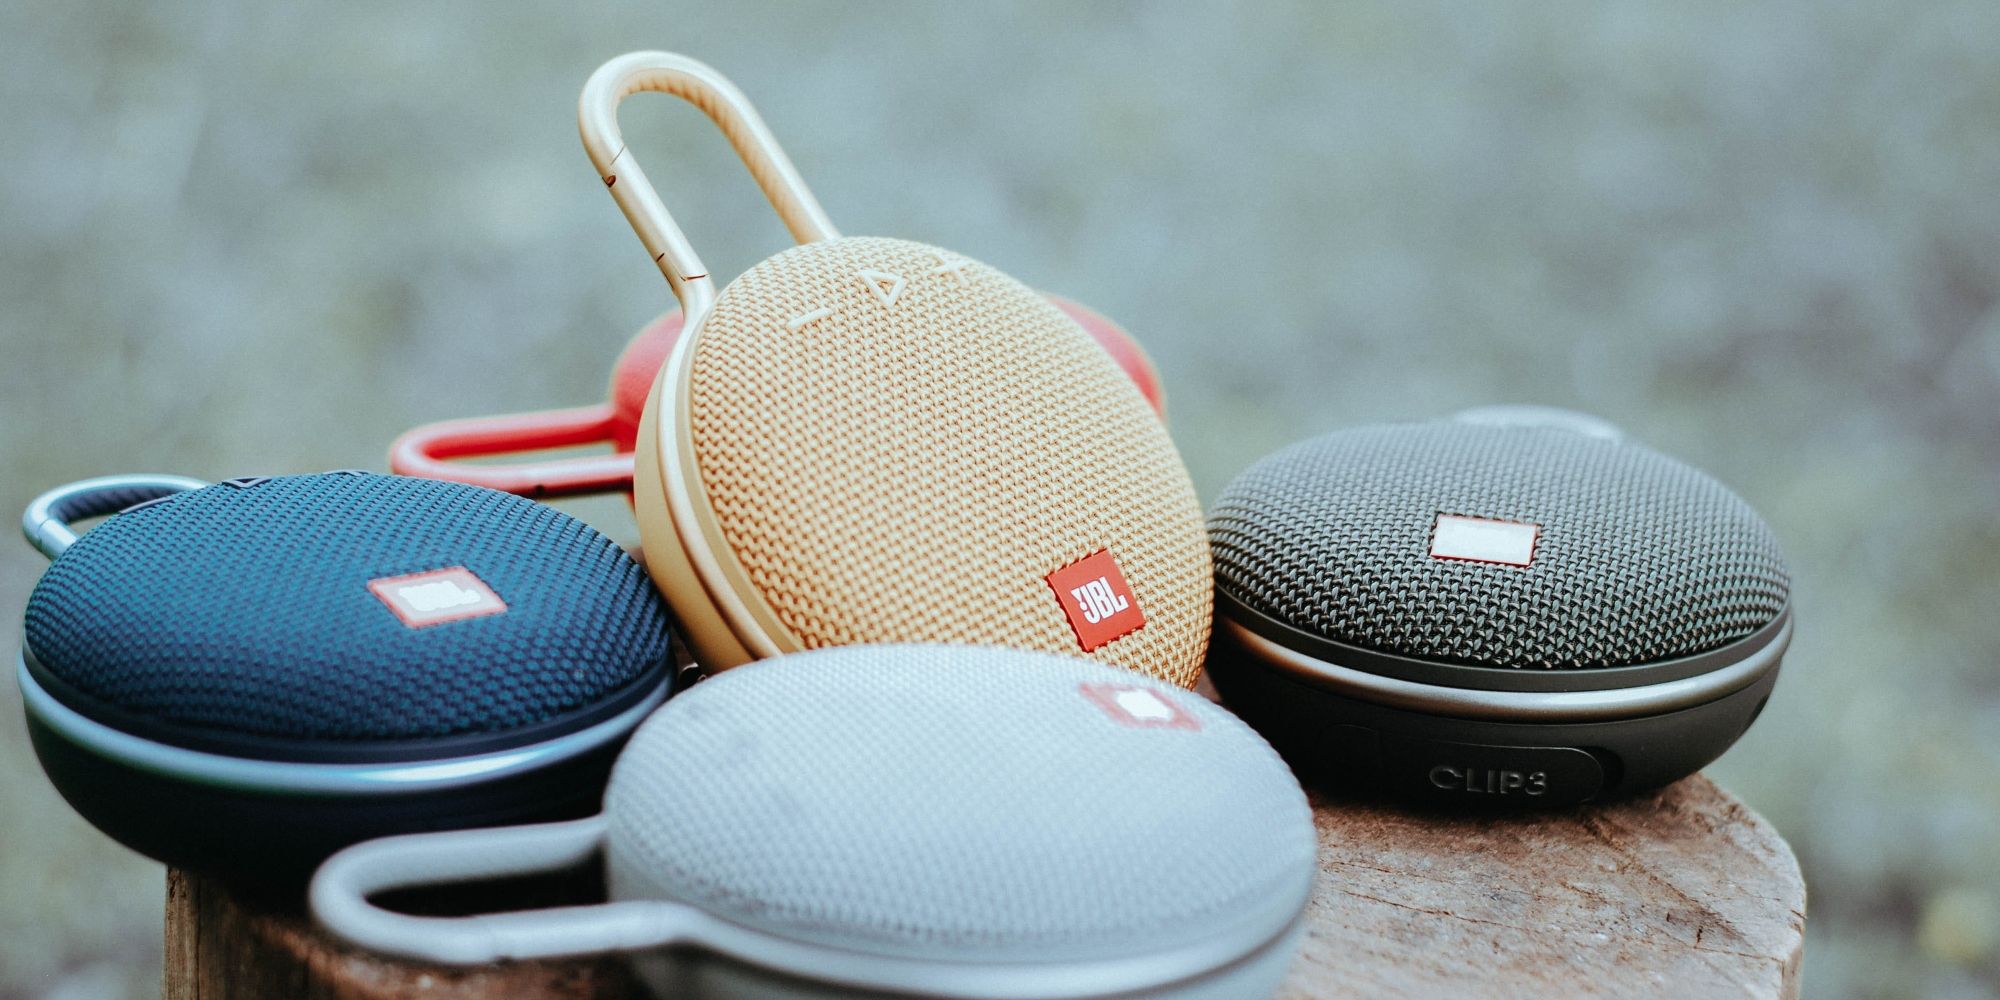 Hands on: JBL Legend CP100 review